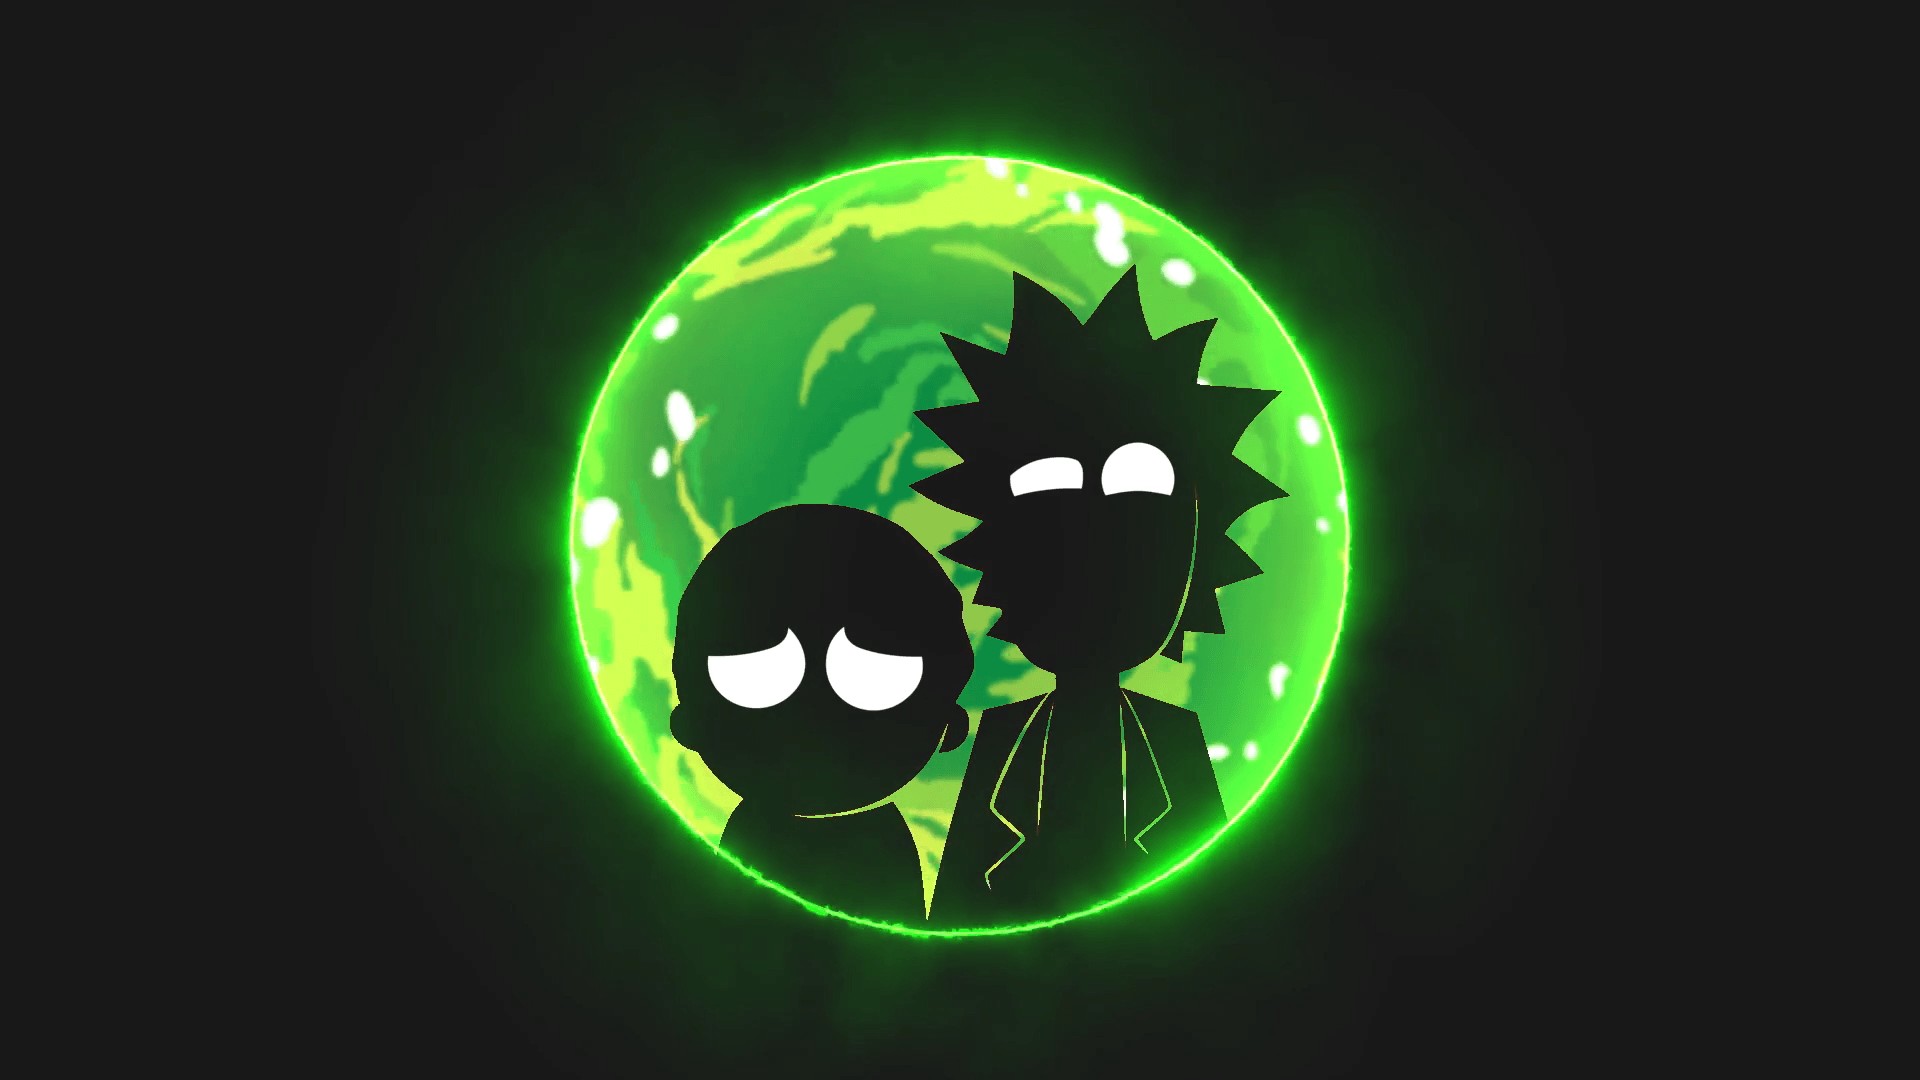 Rick and Morty Wallpaper with high-resolution 1920x1080 pixel. You can use this poster wallpaper for your Desktop Computers, Mac Screensavers, Windows Backgrounds, iPhone Wallpapers, Tablet or Android Lock screen and another Mobile device